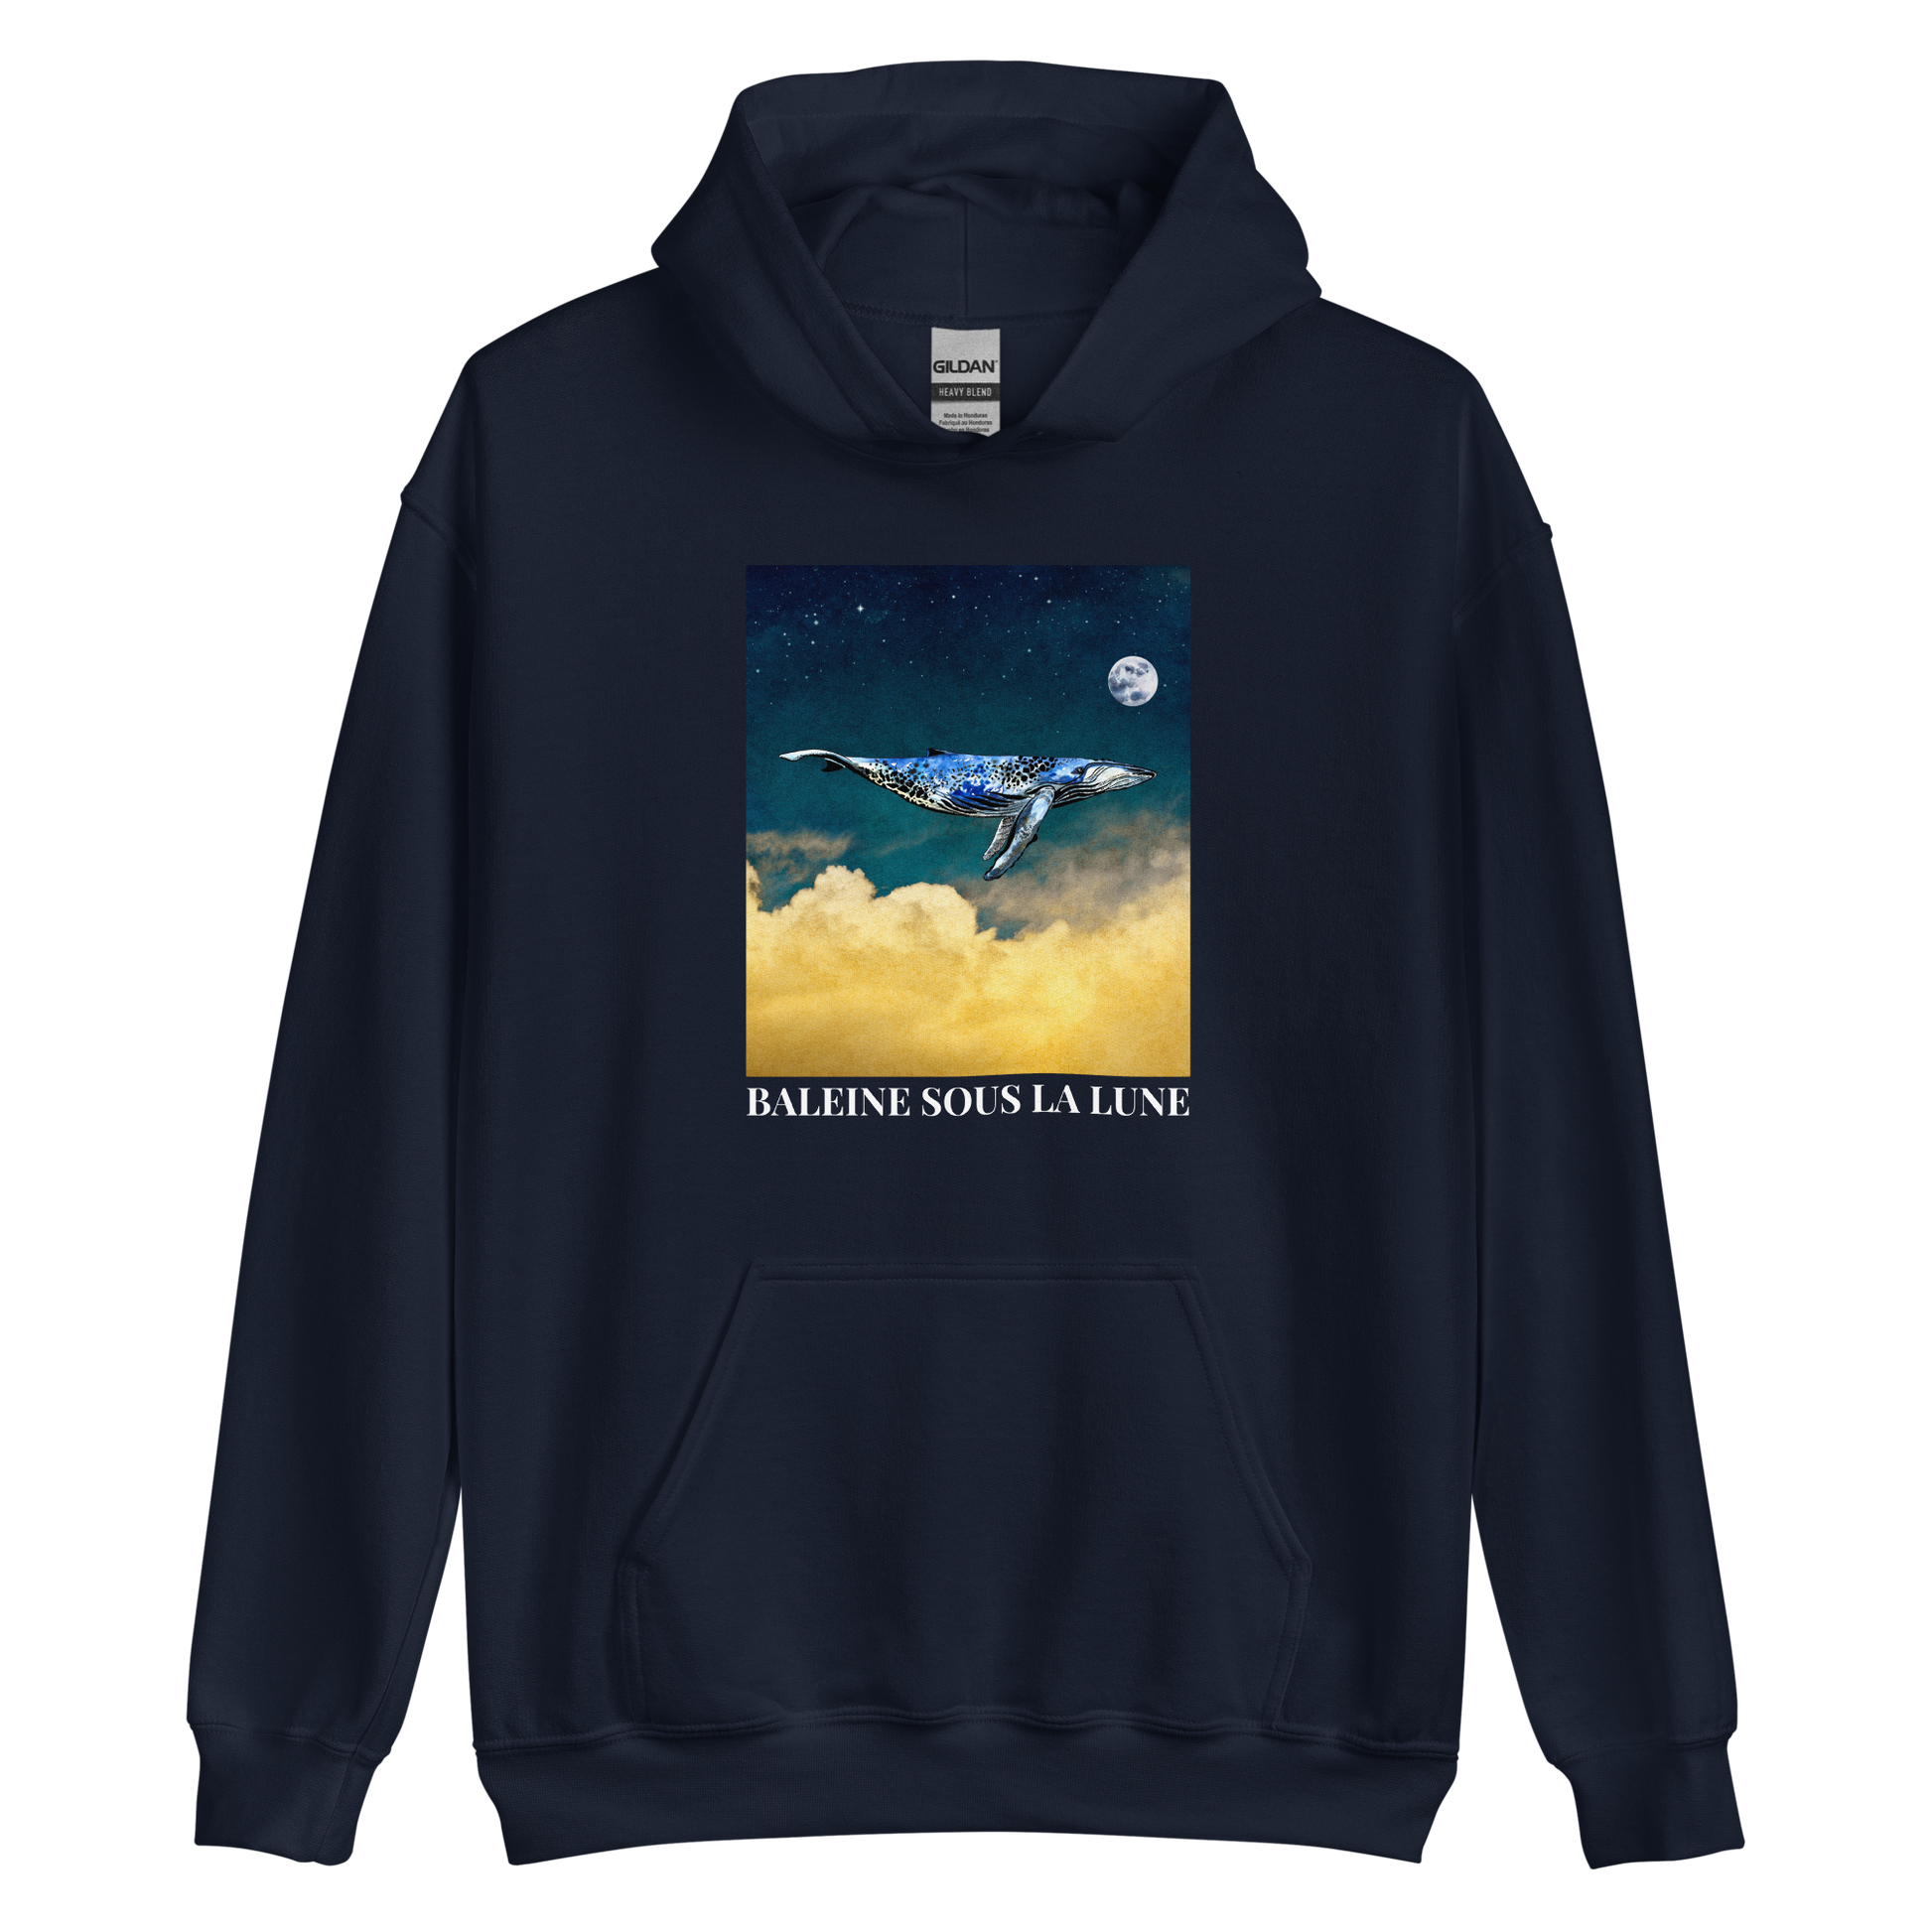 Navy Whale Hoodie featuring a charming Whale Under The Moon graphic on the chest - Cool Graphic Whale Hoodies - Boozy Fox